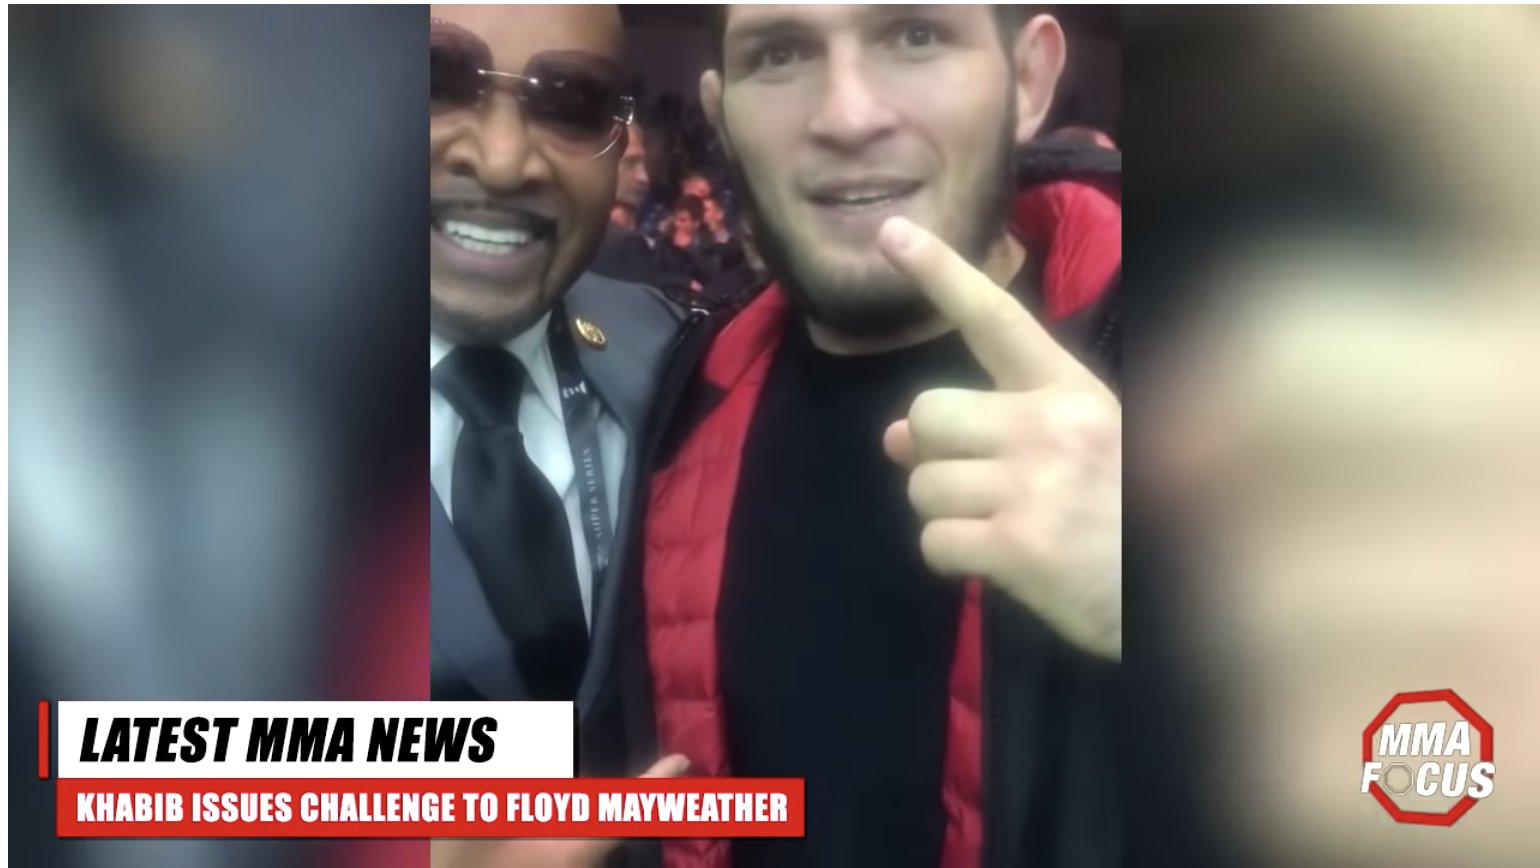 Khabib CALLS OUT Floyd Mayweather, refuses UFC return if teammates are fired for UFC 229 brawl